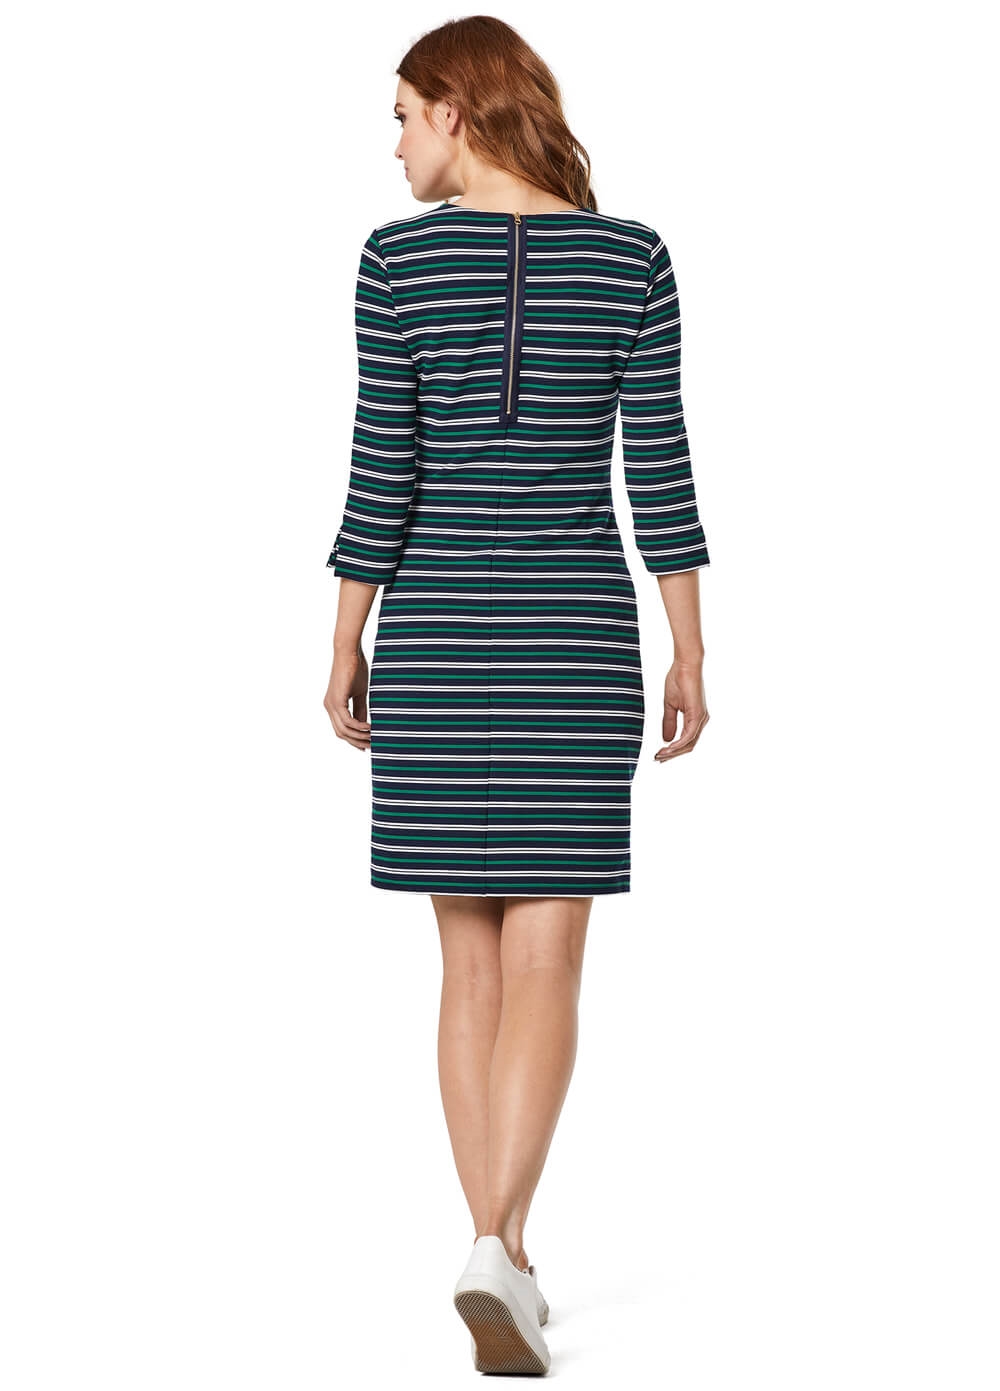 Sky Captain Maternity Shift Dress in Green Stripes by Queen mum